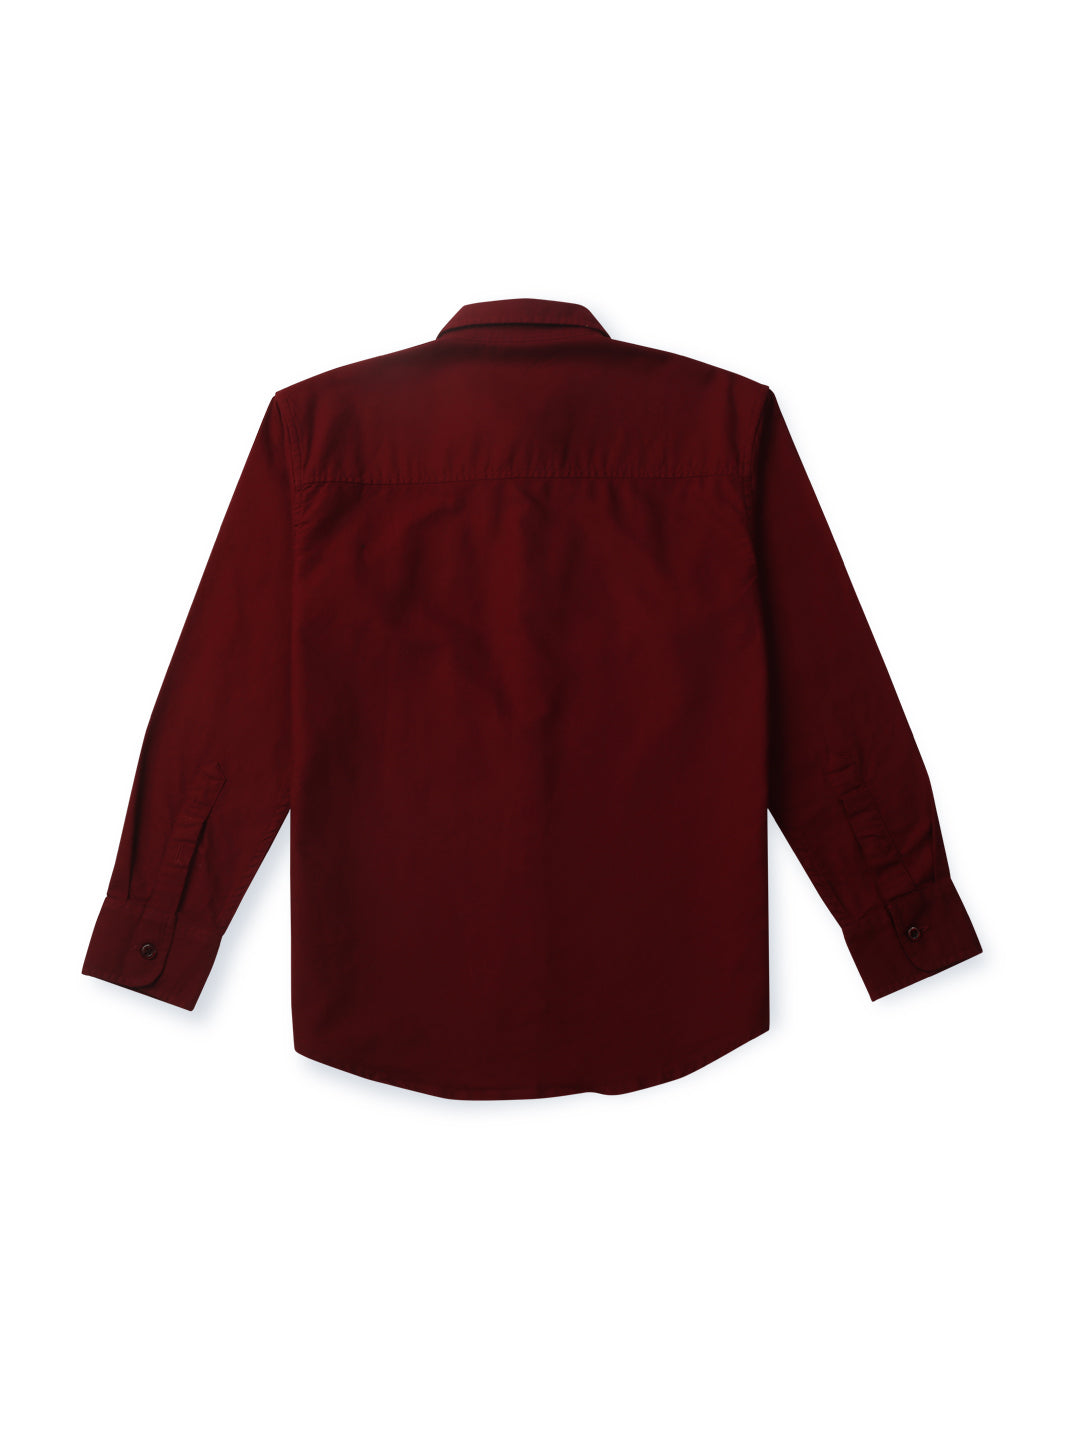 Boys Red Solid Woven Shirt